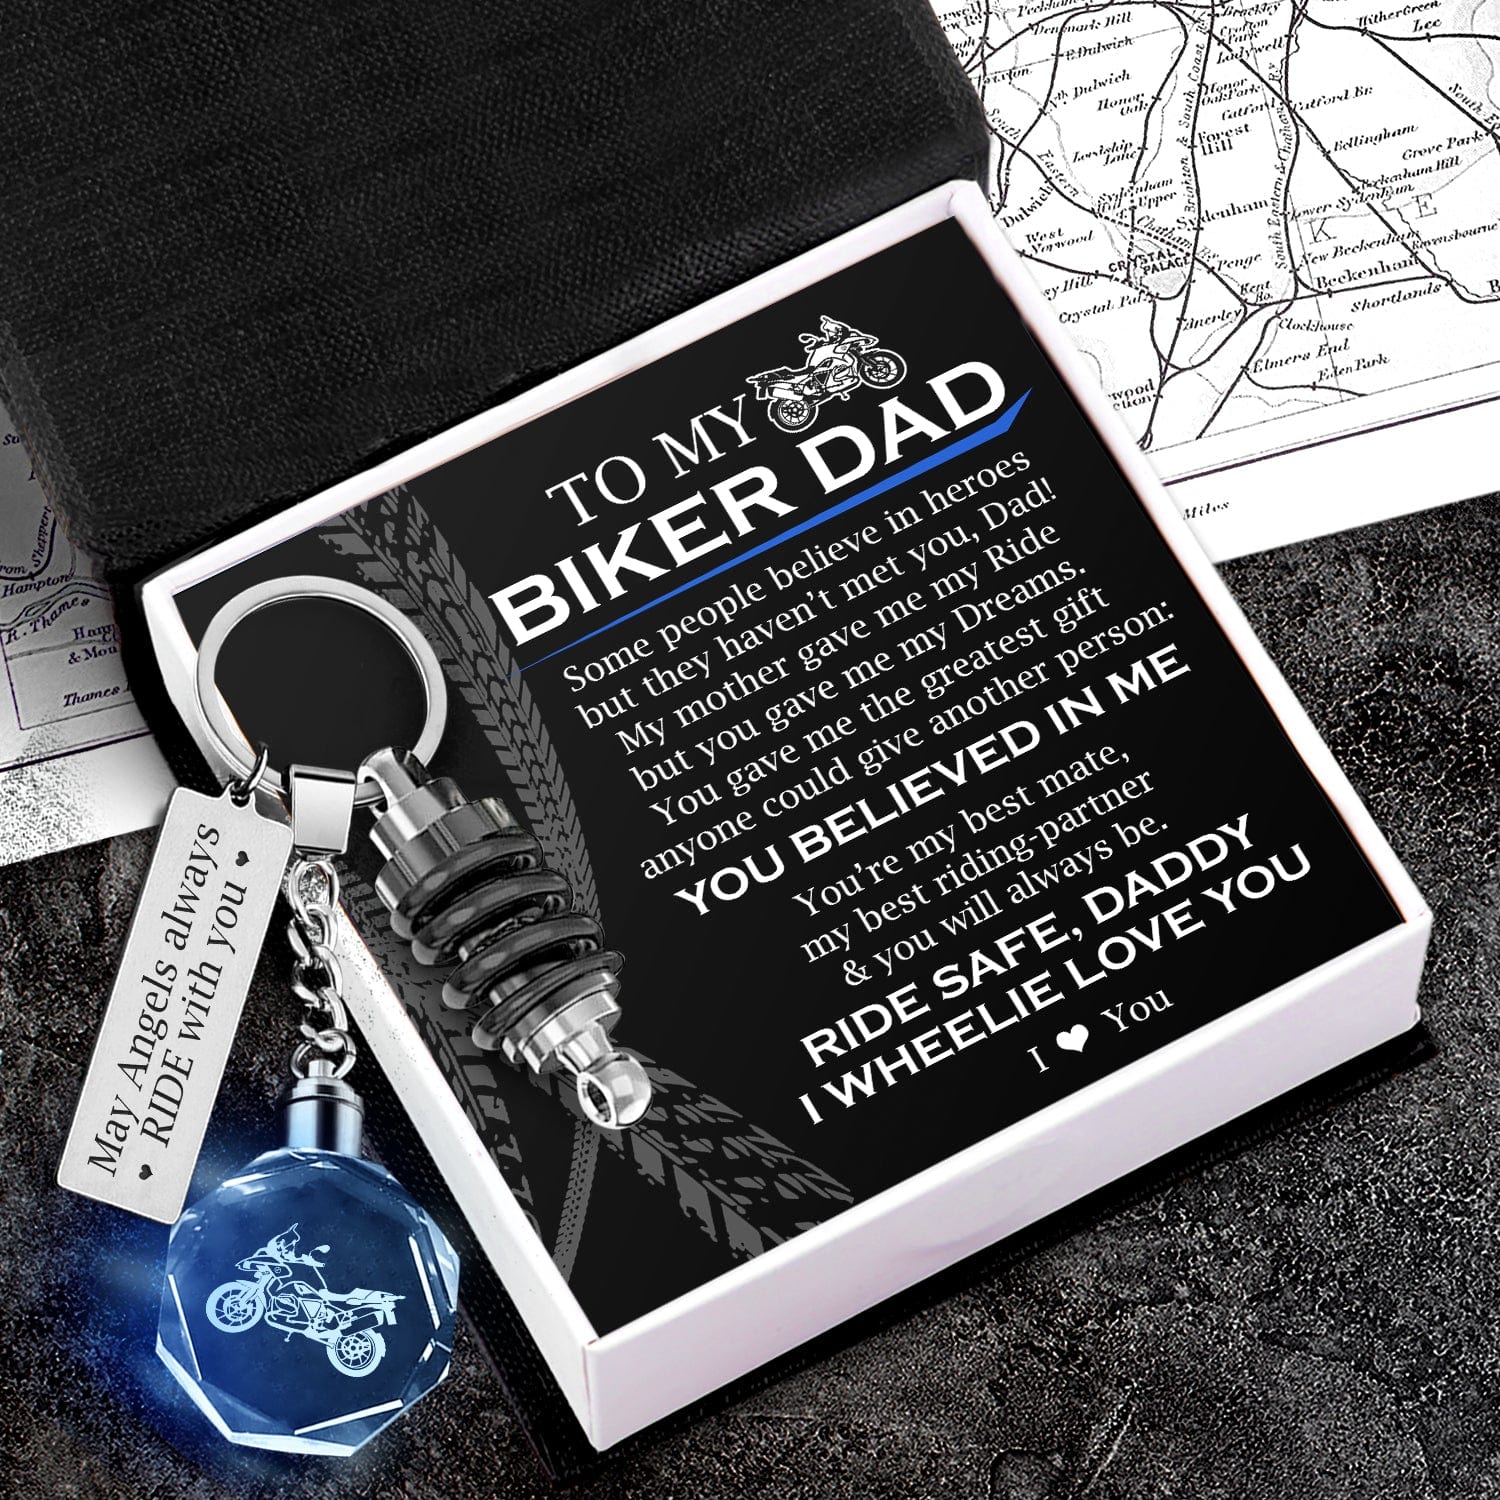 An LED light keychain with a special message for biker dads